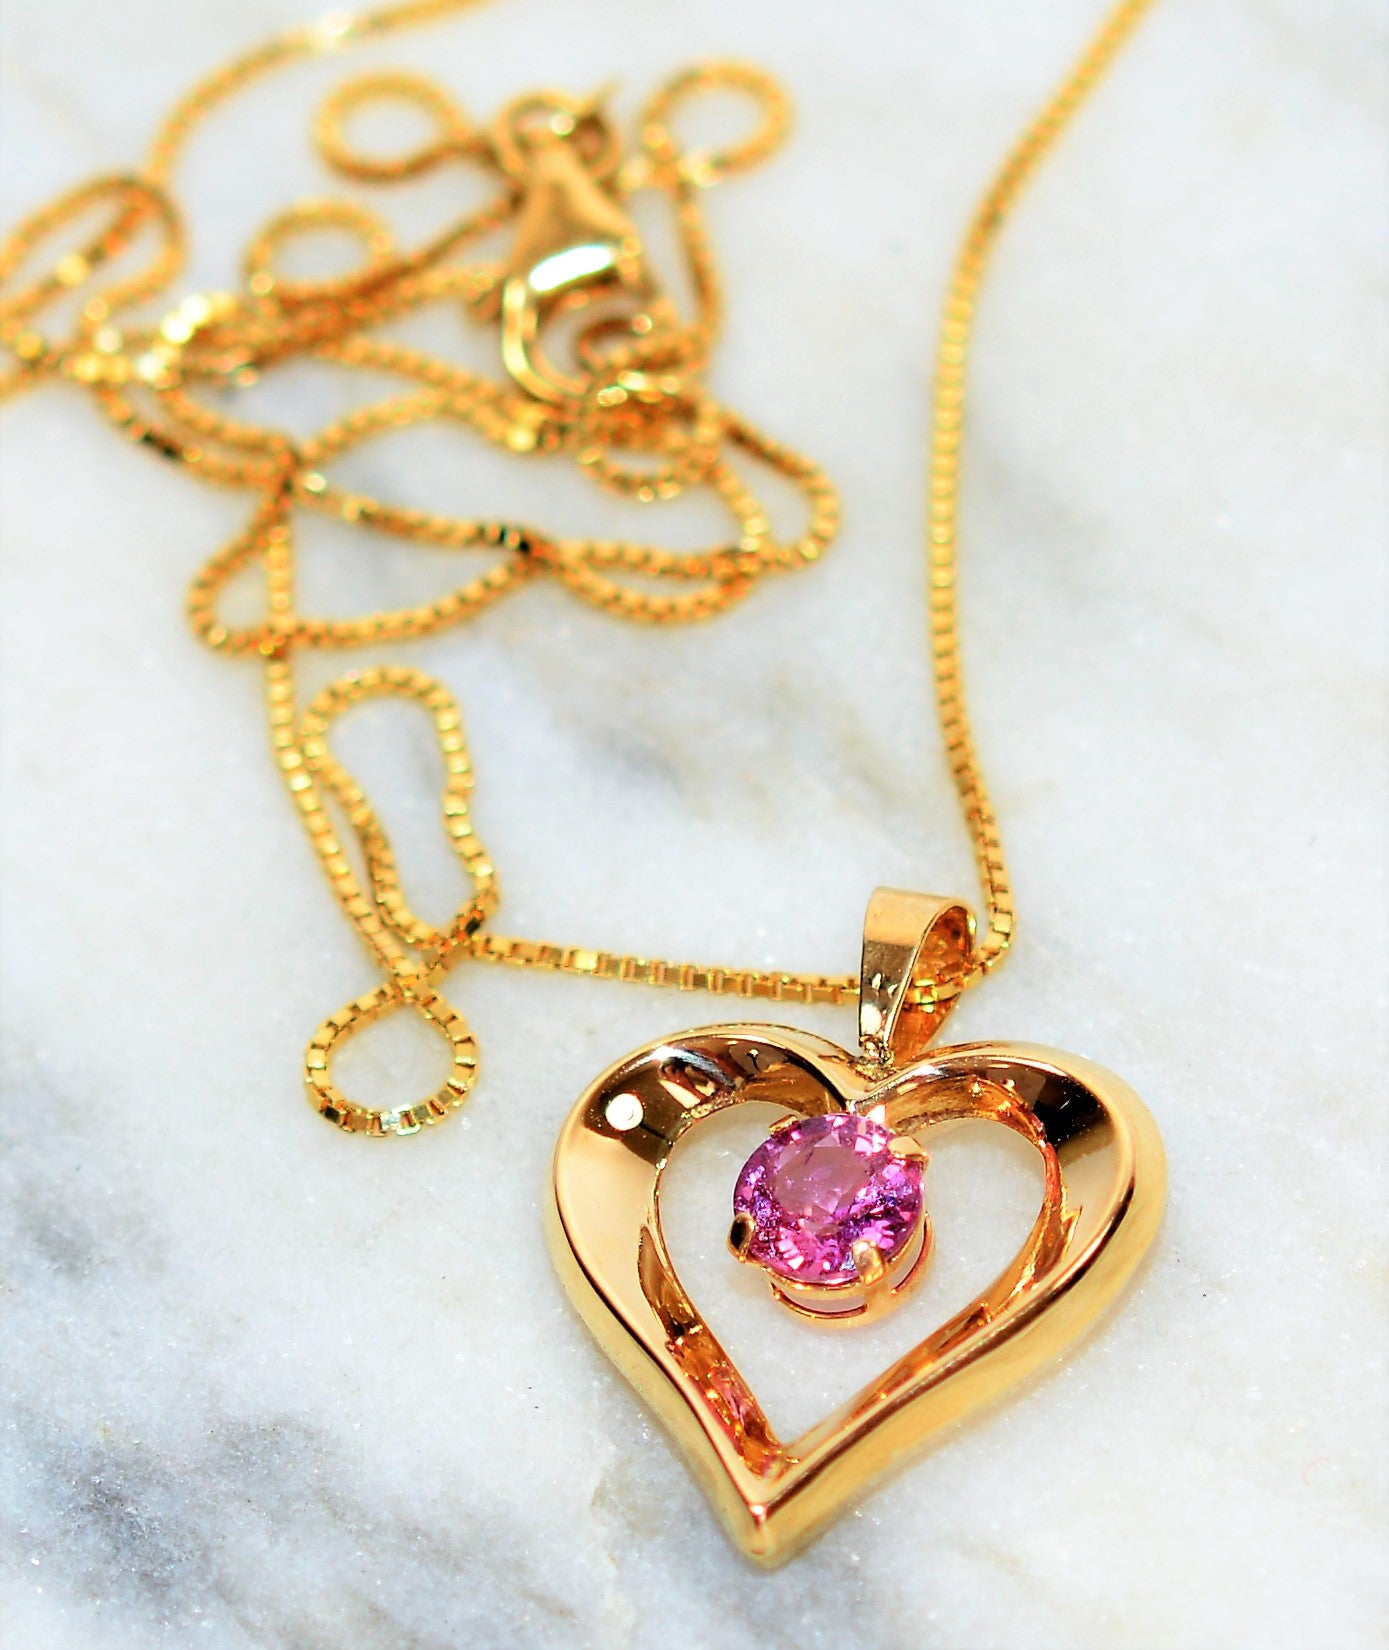 Natural Padparadscha Sapphire Necklace 10K Solid Gold .52ct Heart Pendant Solitaire Necklace Pink Necklace Birthstone Necklace Fine Jewelry